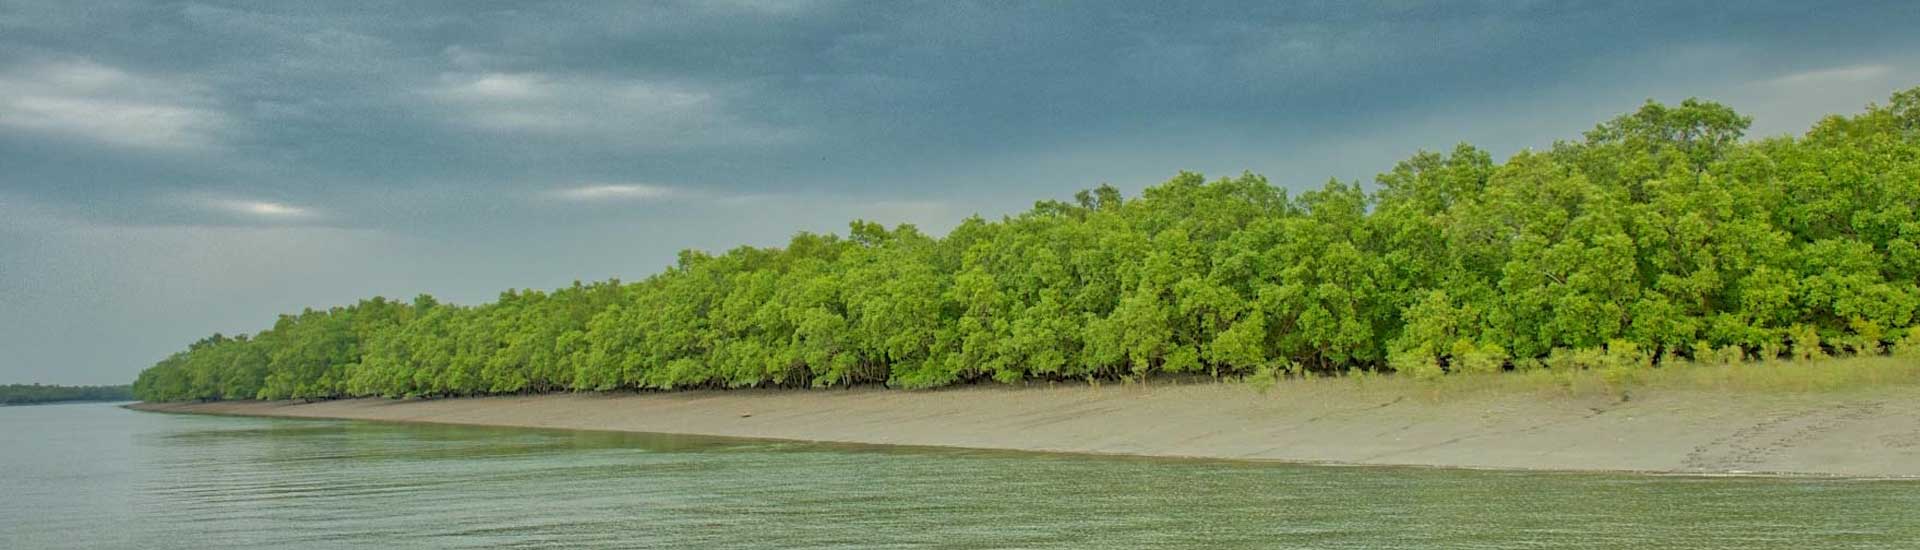 Why should your next travel destination be Sundarban?